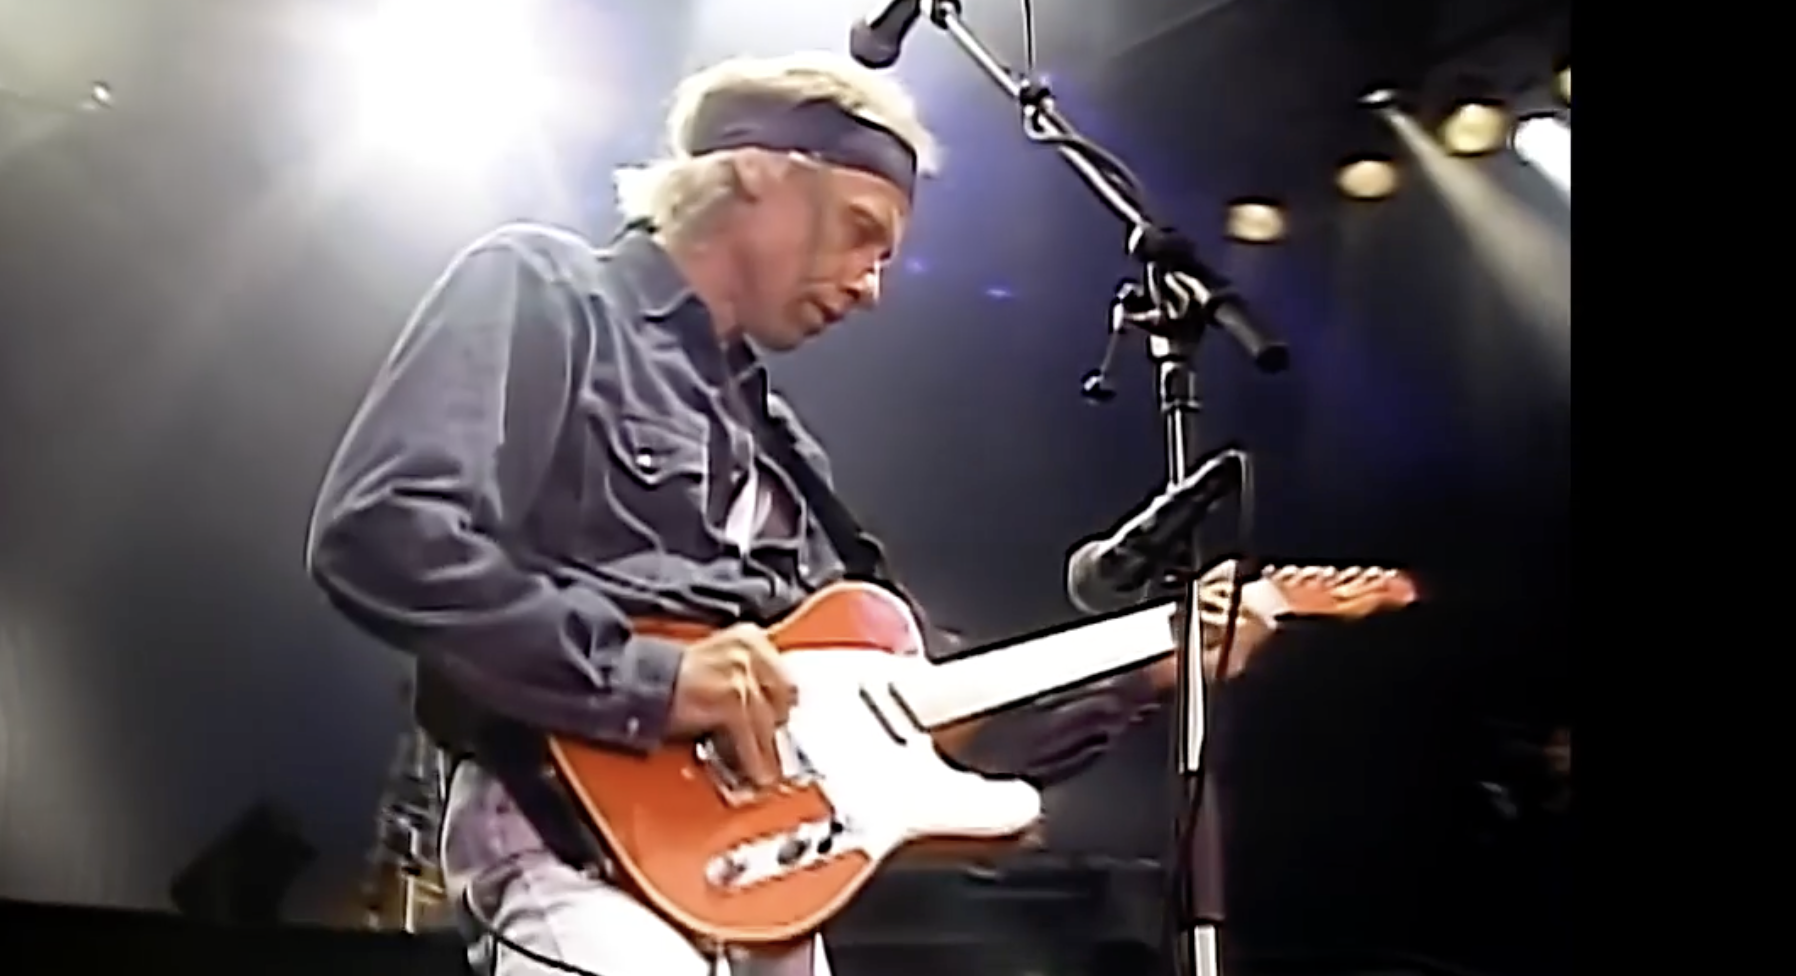 The Dire Straits frontman playing Walk of Life with another of his guitars. /Christies.com